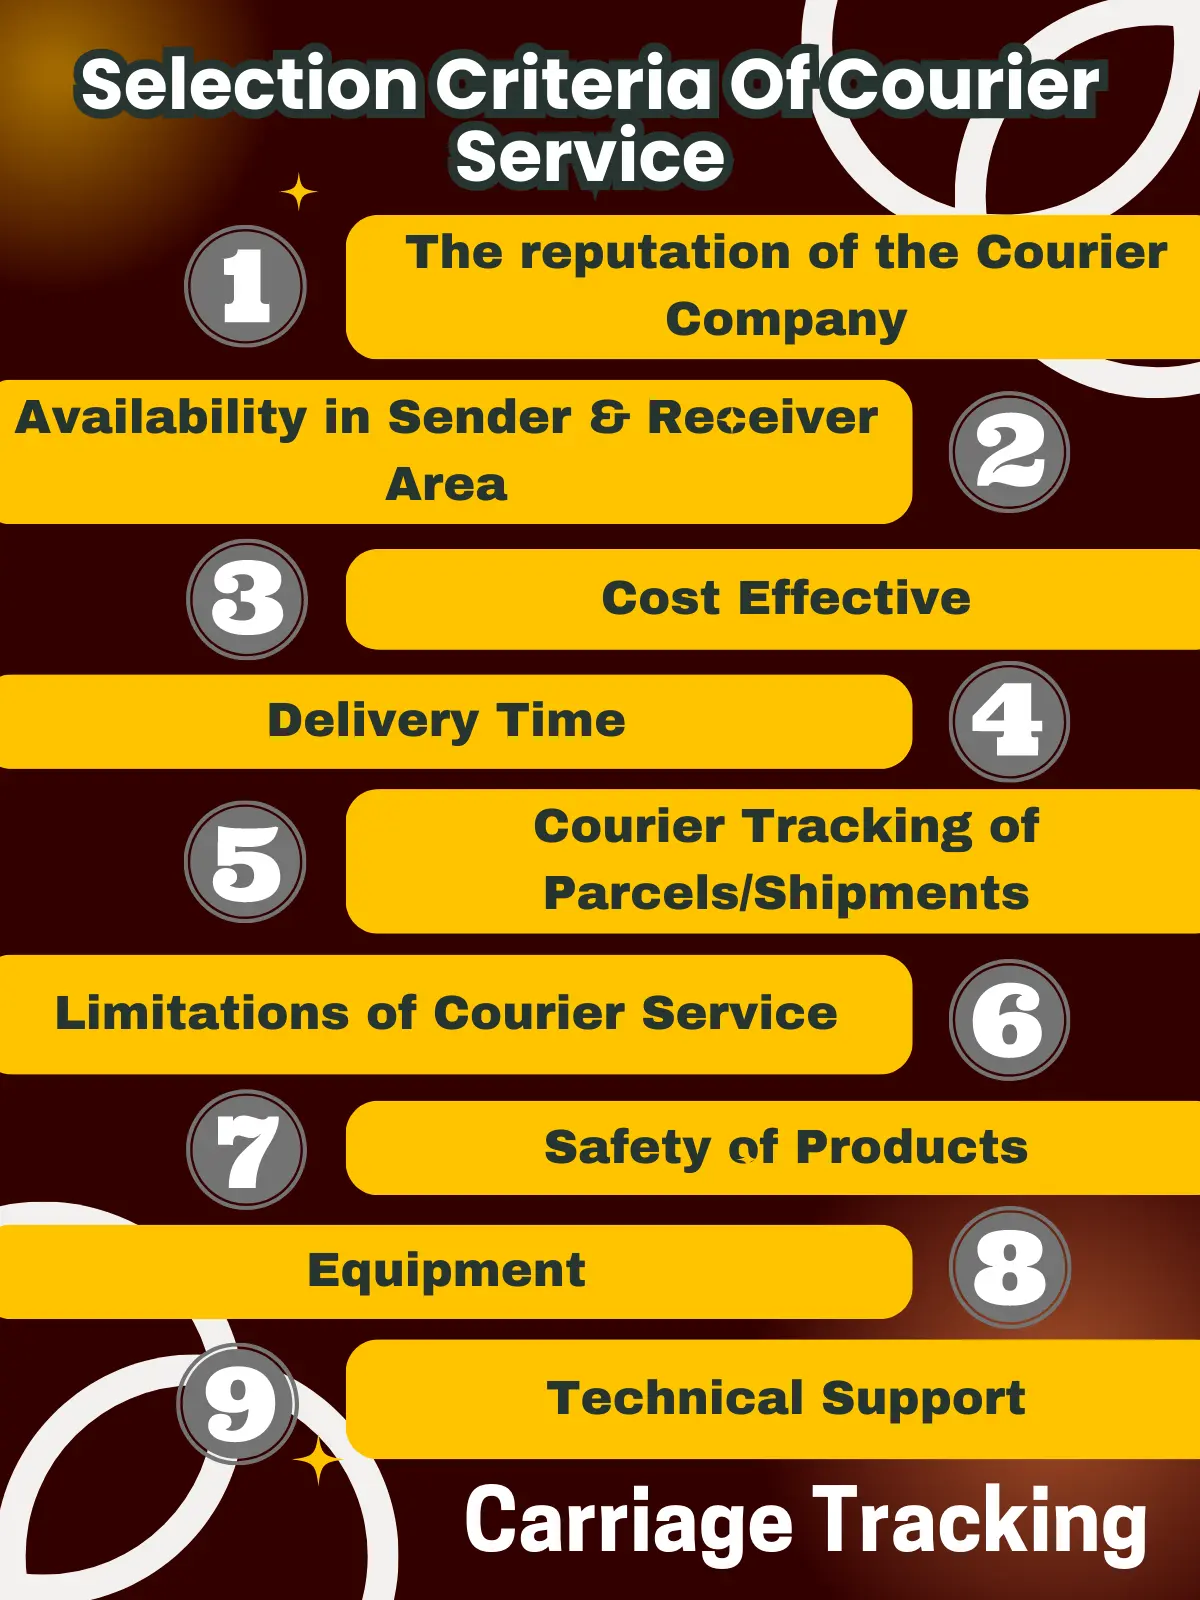 Key Factors to Select a Courier Service